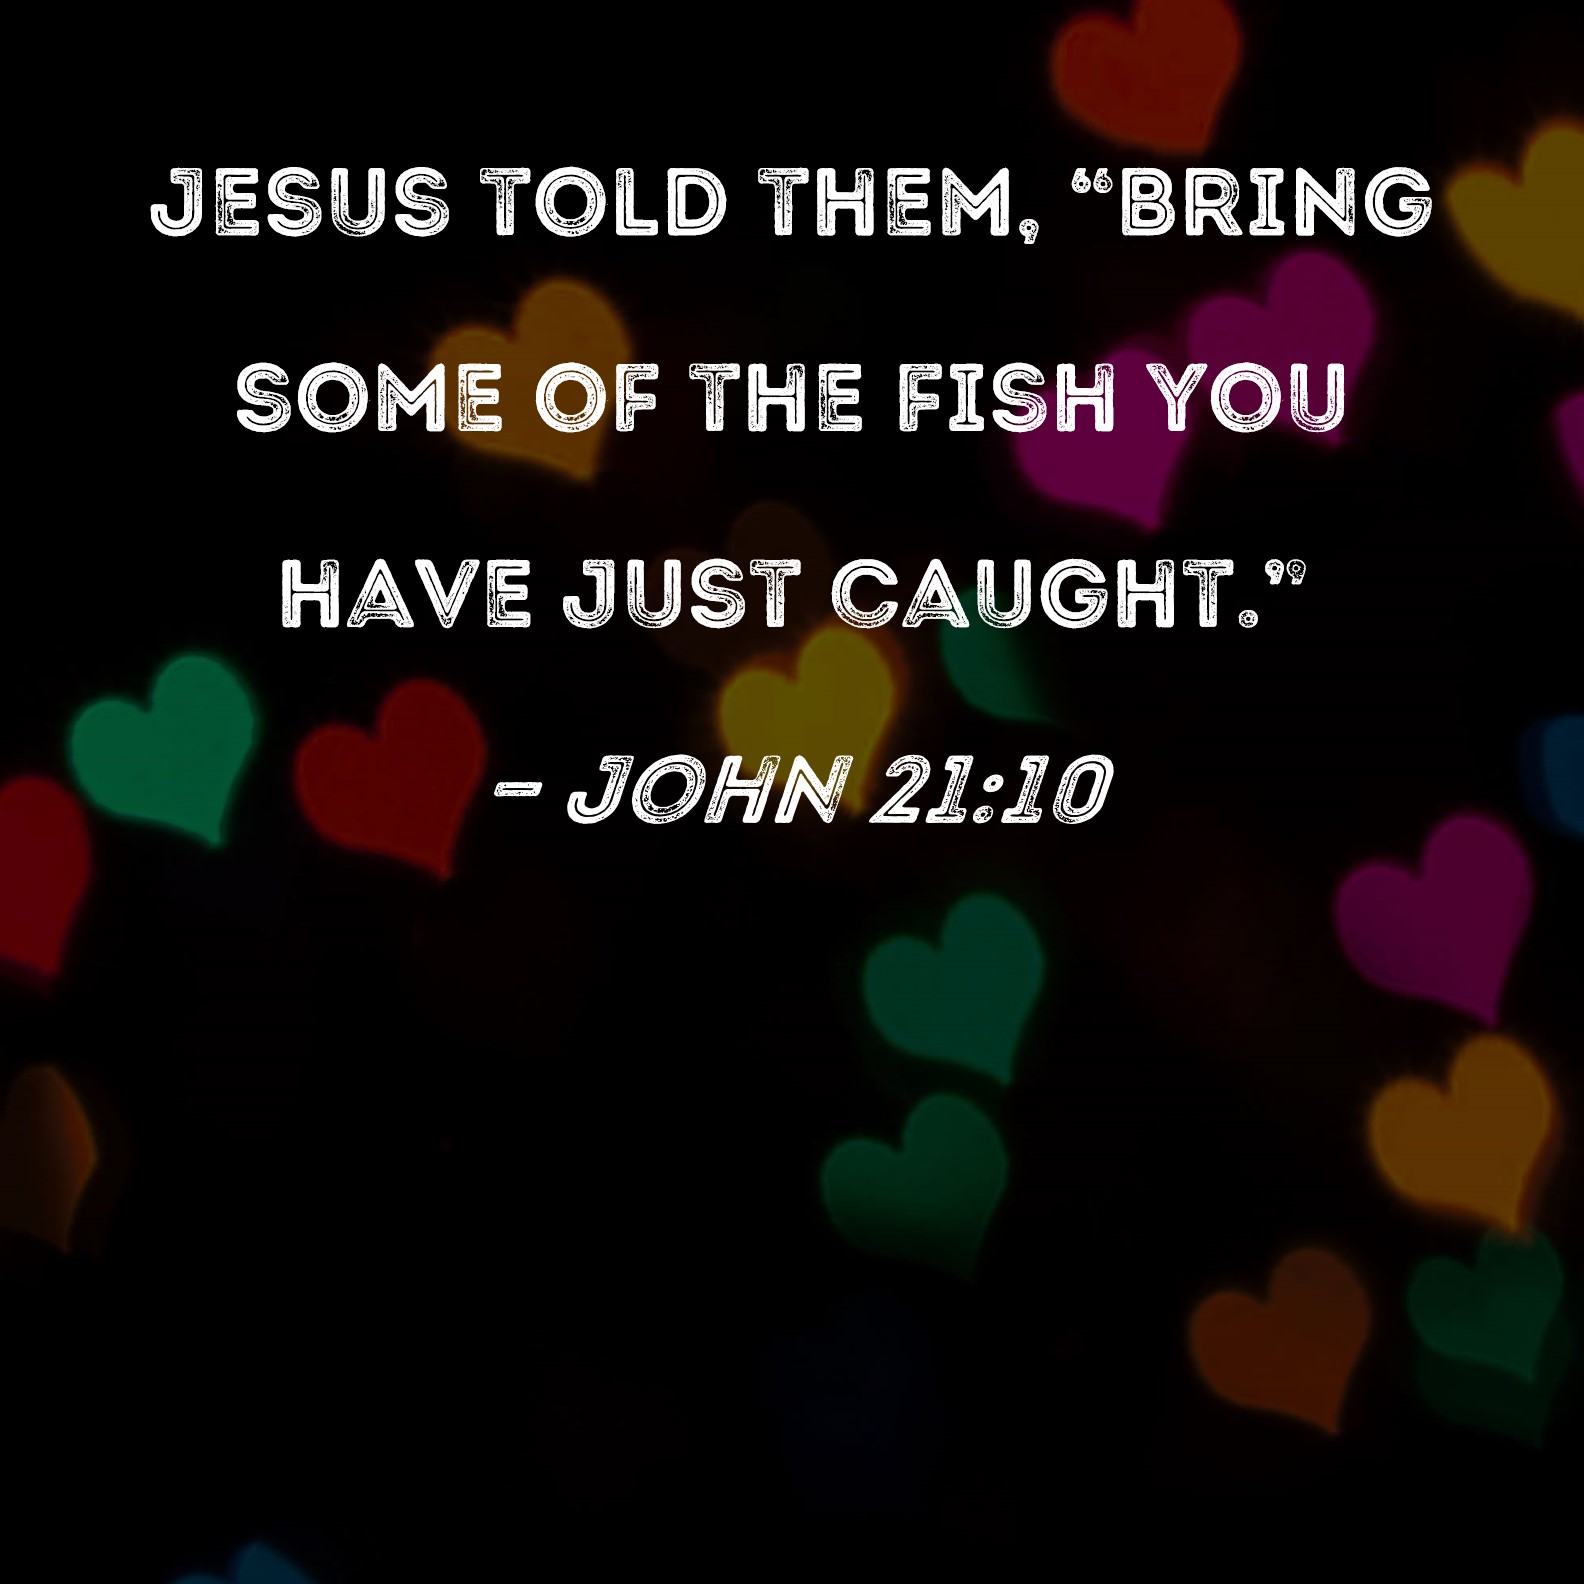 John 2110 Jesus told them, "Bring some of the fish you have just caught."